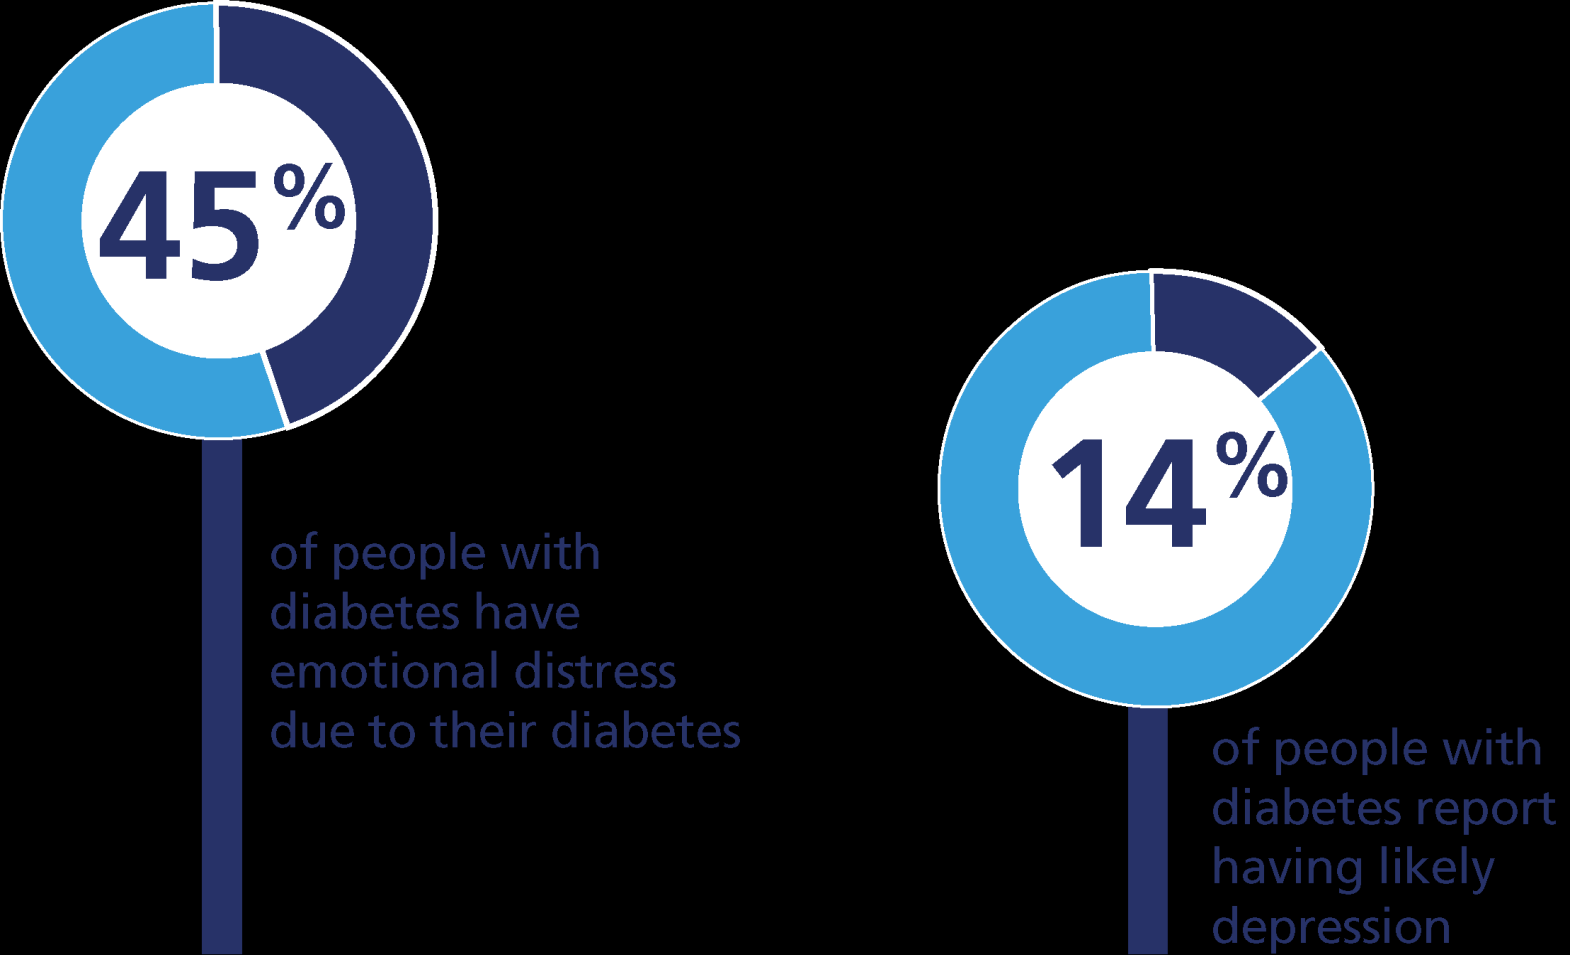 Living with and managing diabetes is distressing for people with diabetes Nicolucci A,